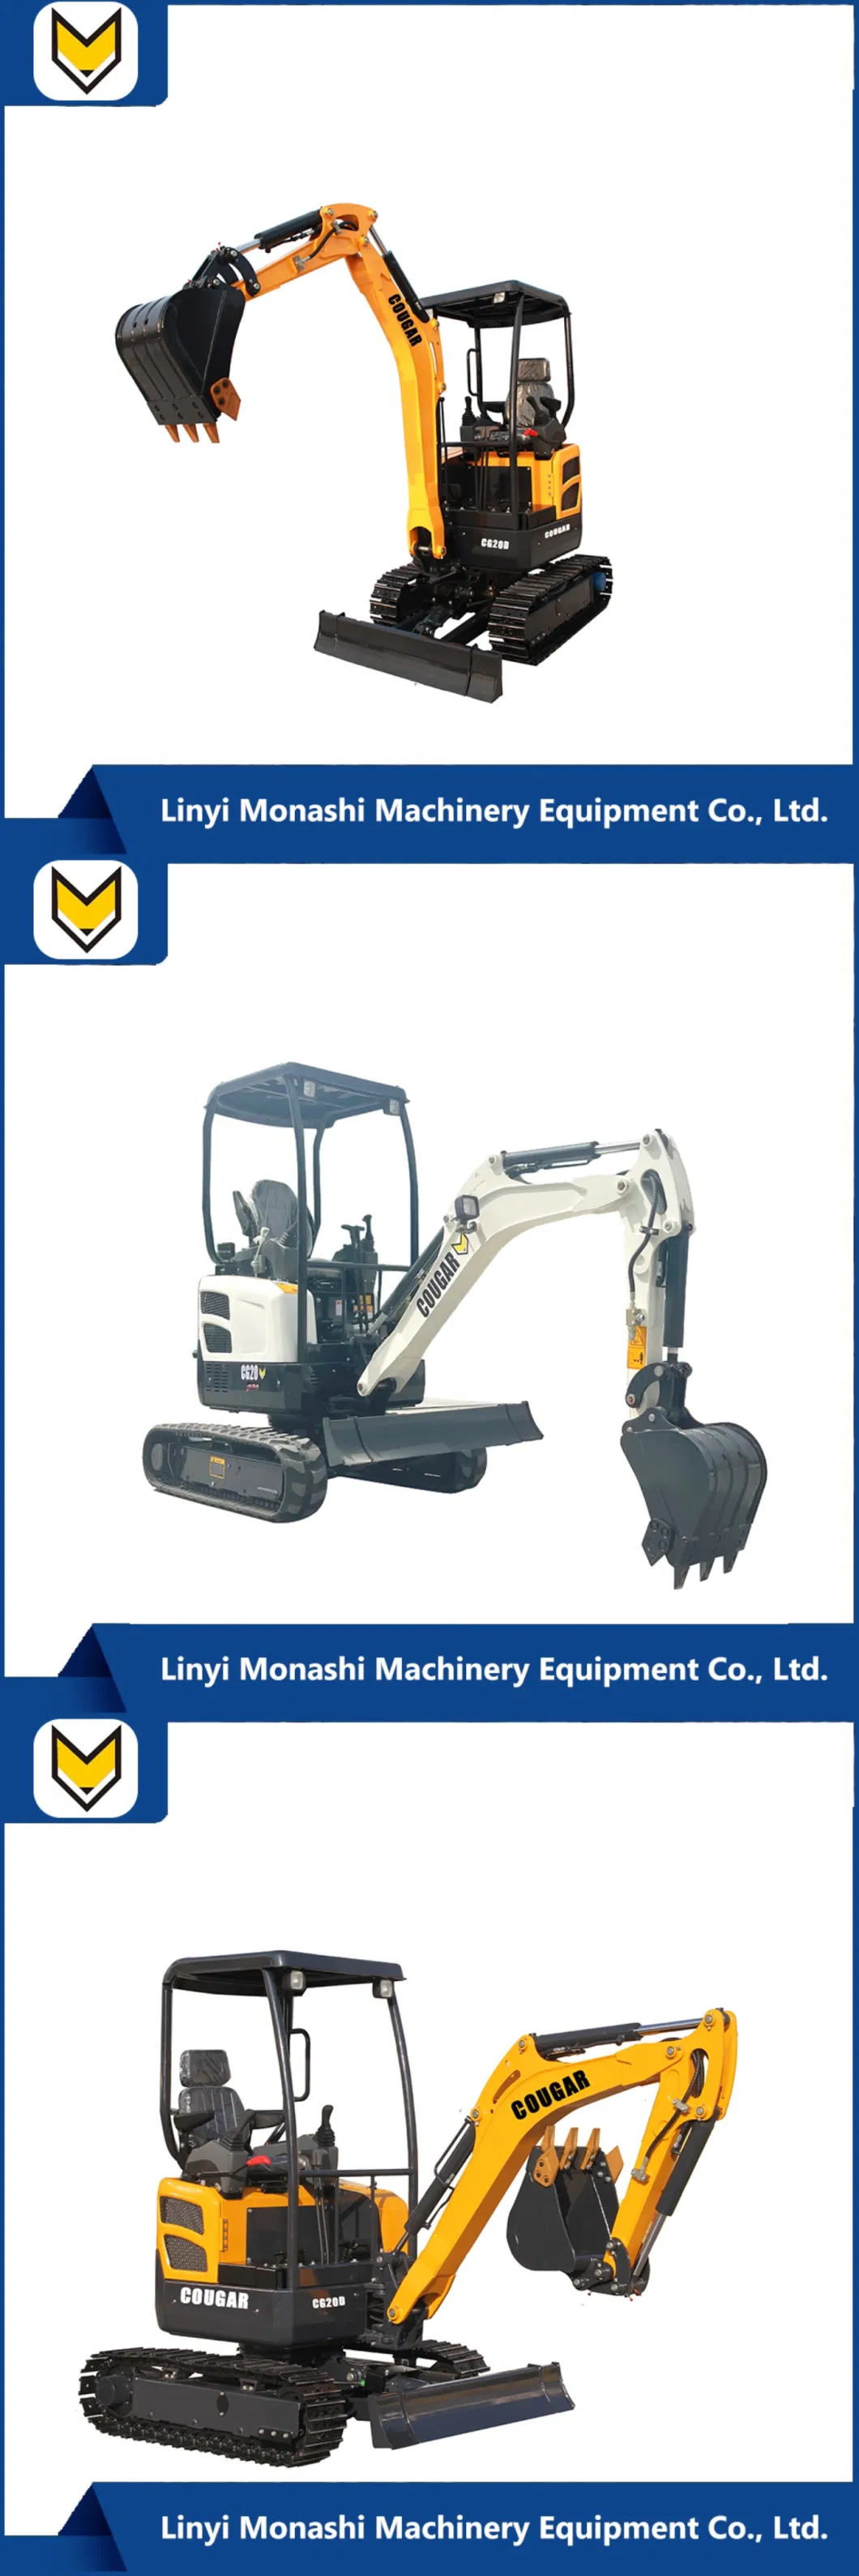 China Bonny New Class Large Crawler Electric Hydraulic Excavator for Sale